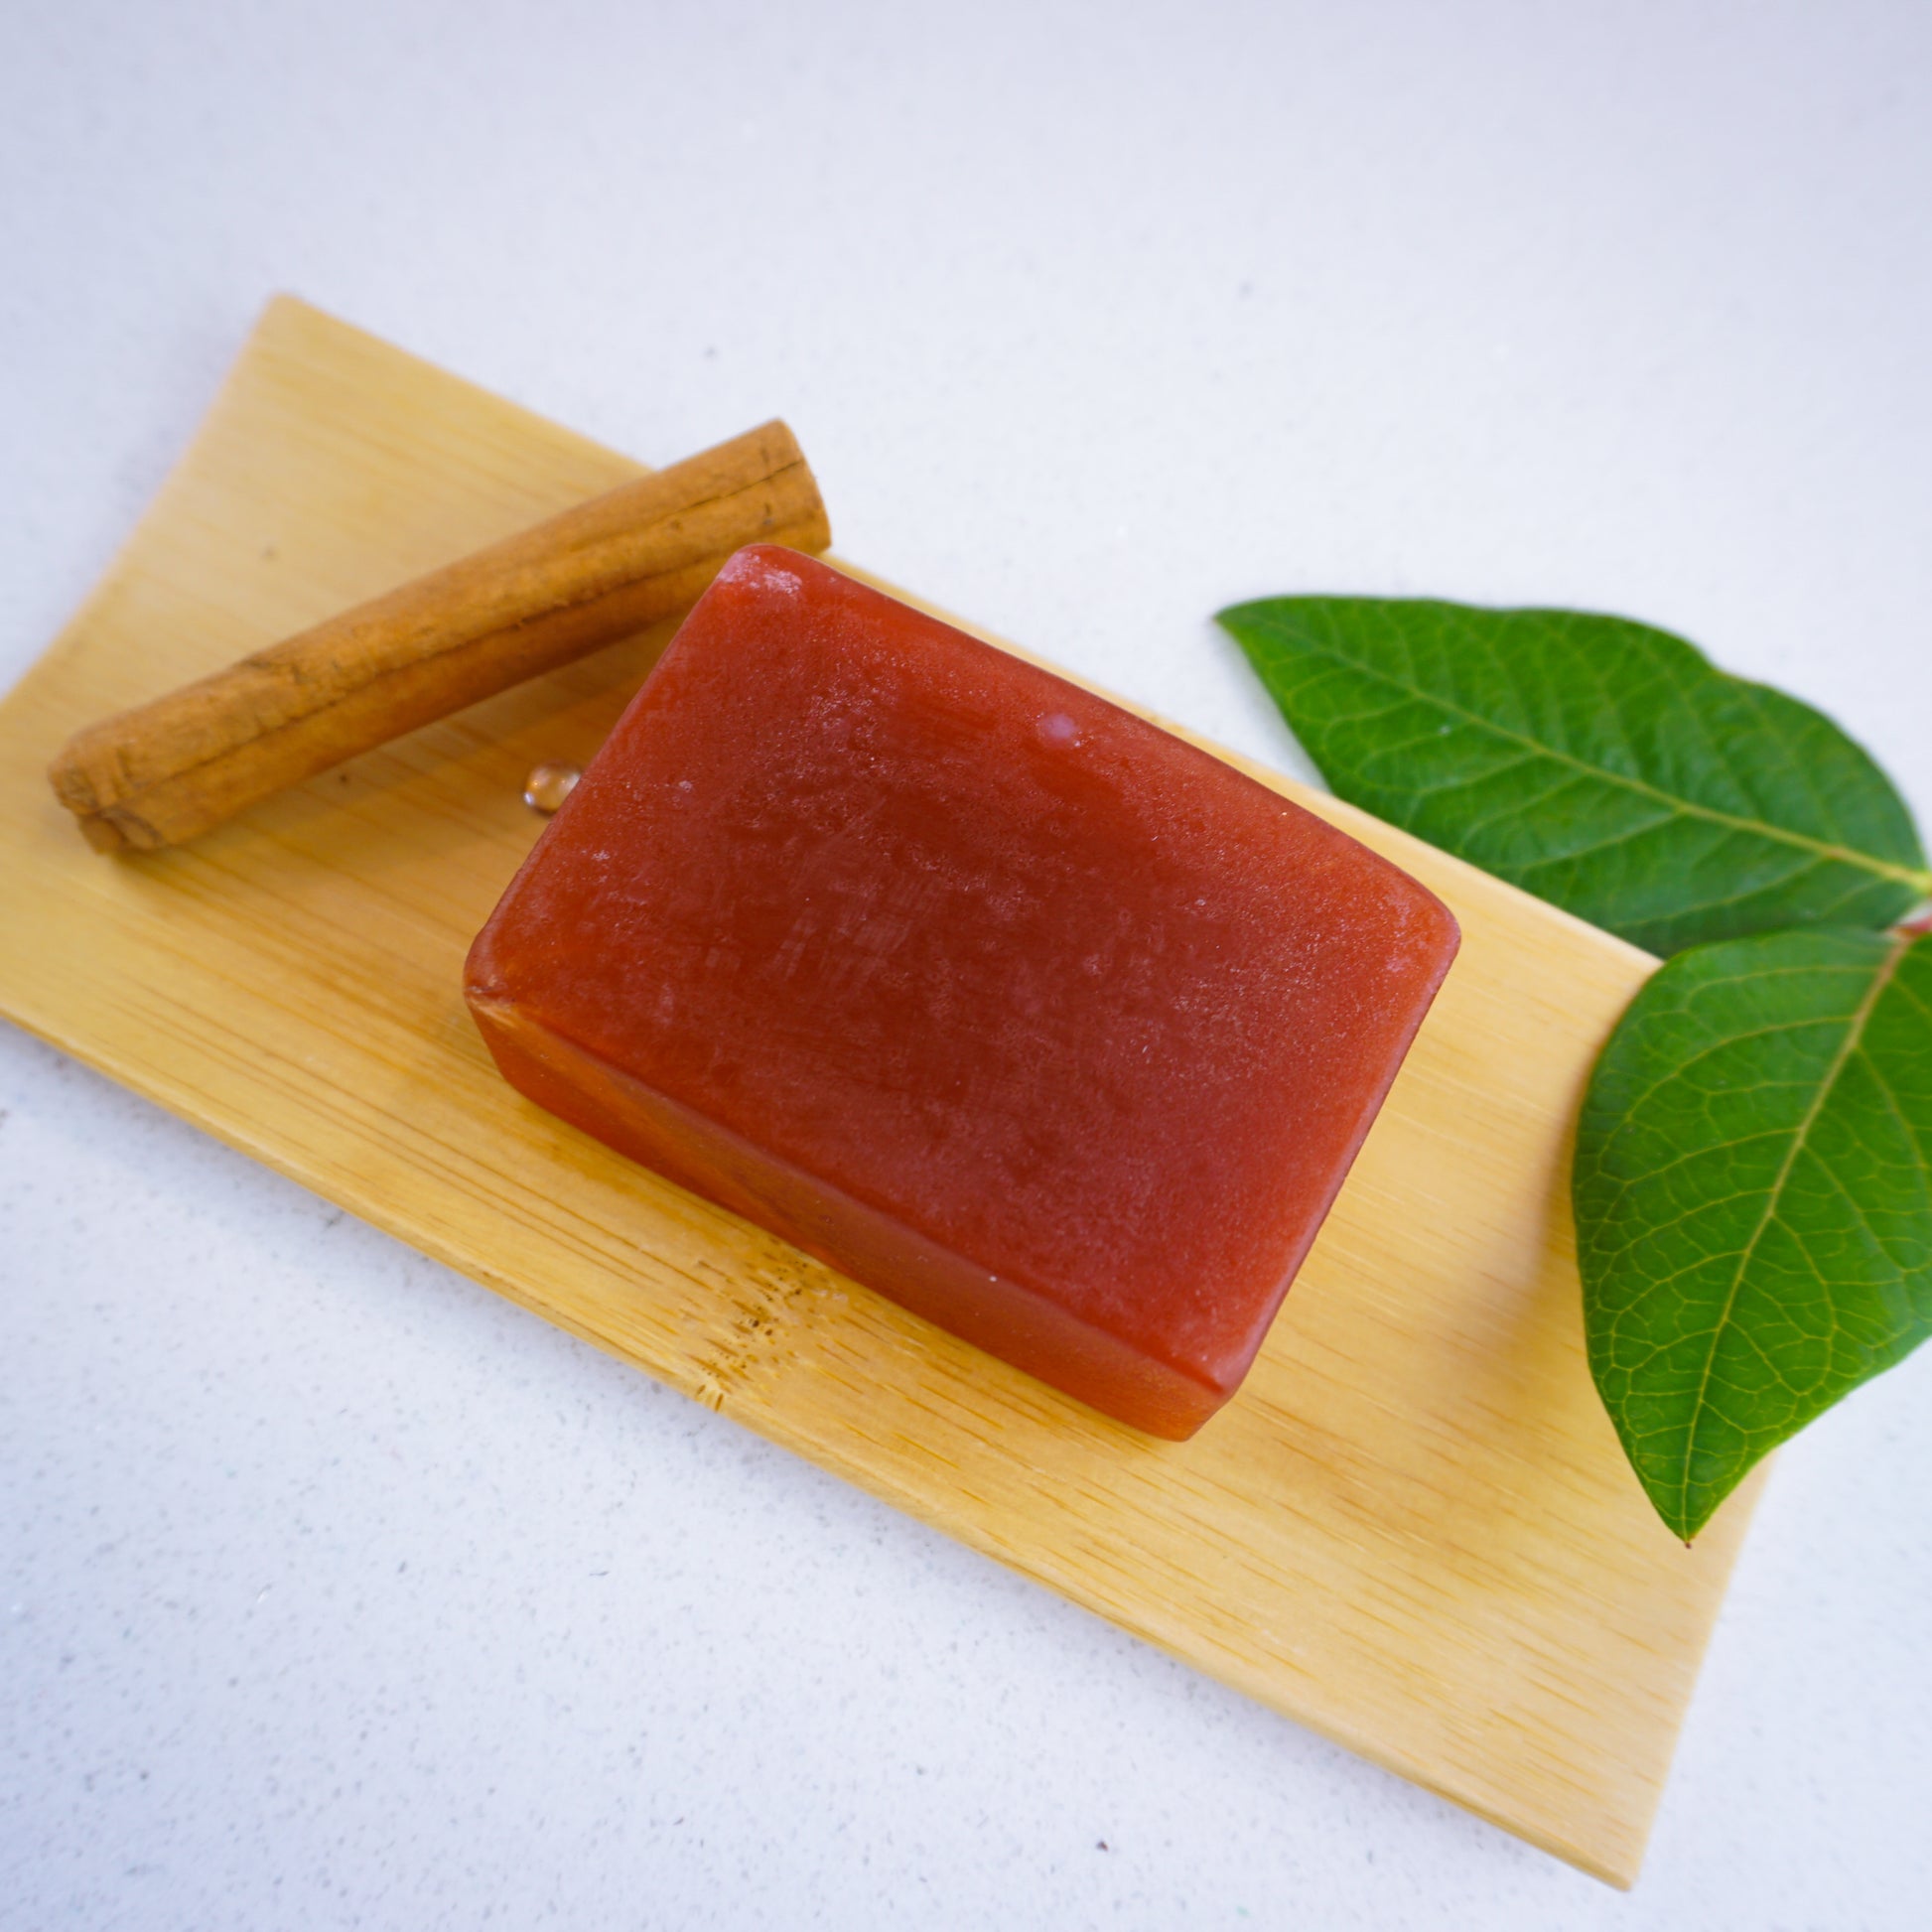 Honey and vanilla and cinnamon soap bar laid flat on bamboo tray surrounded by a cinnamon stick and leaves